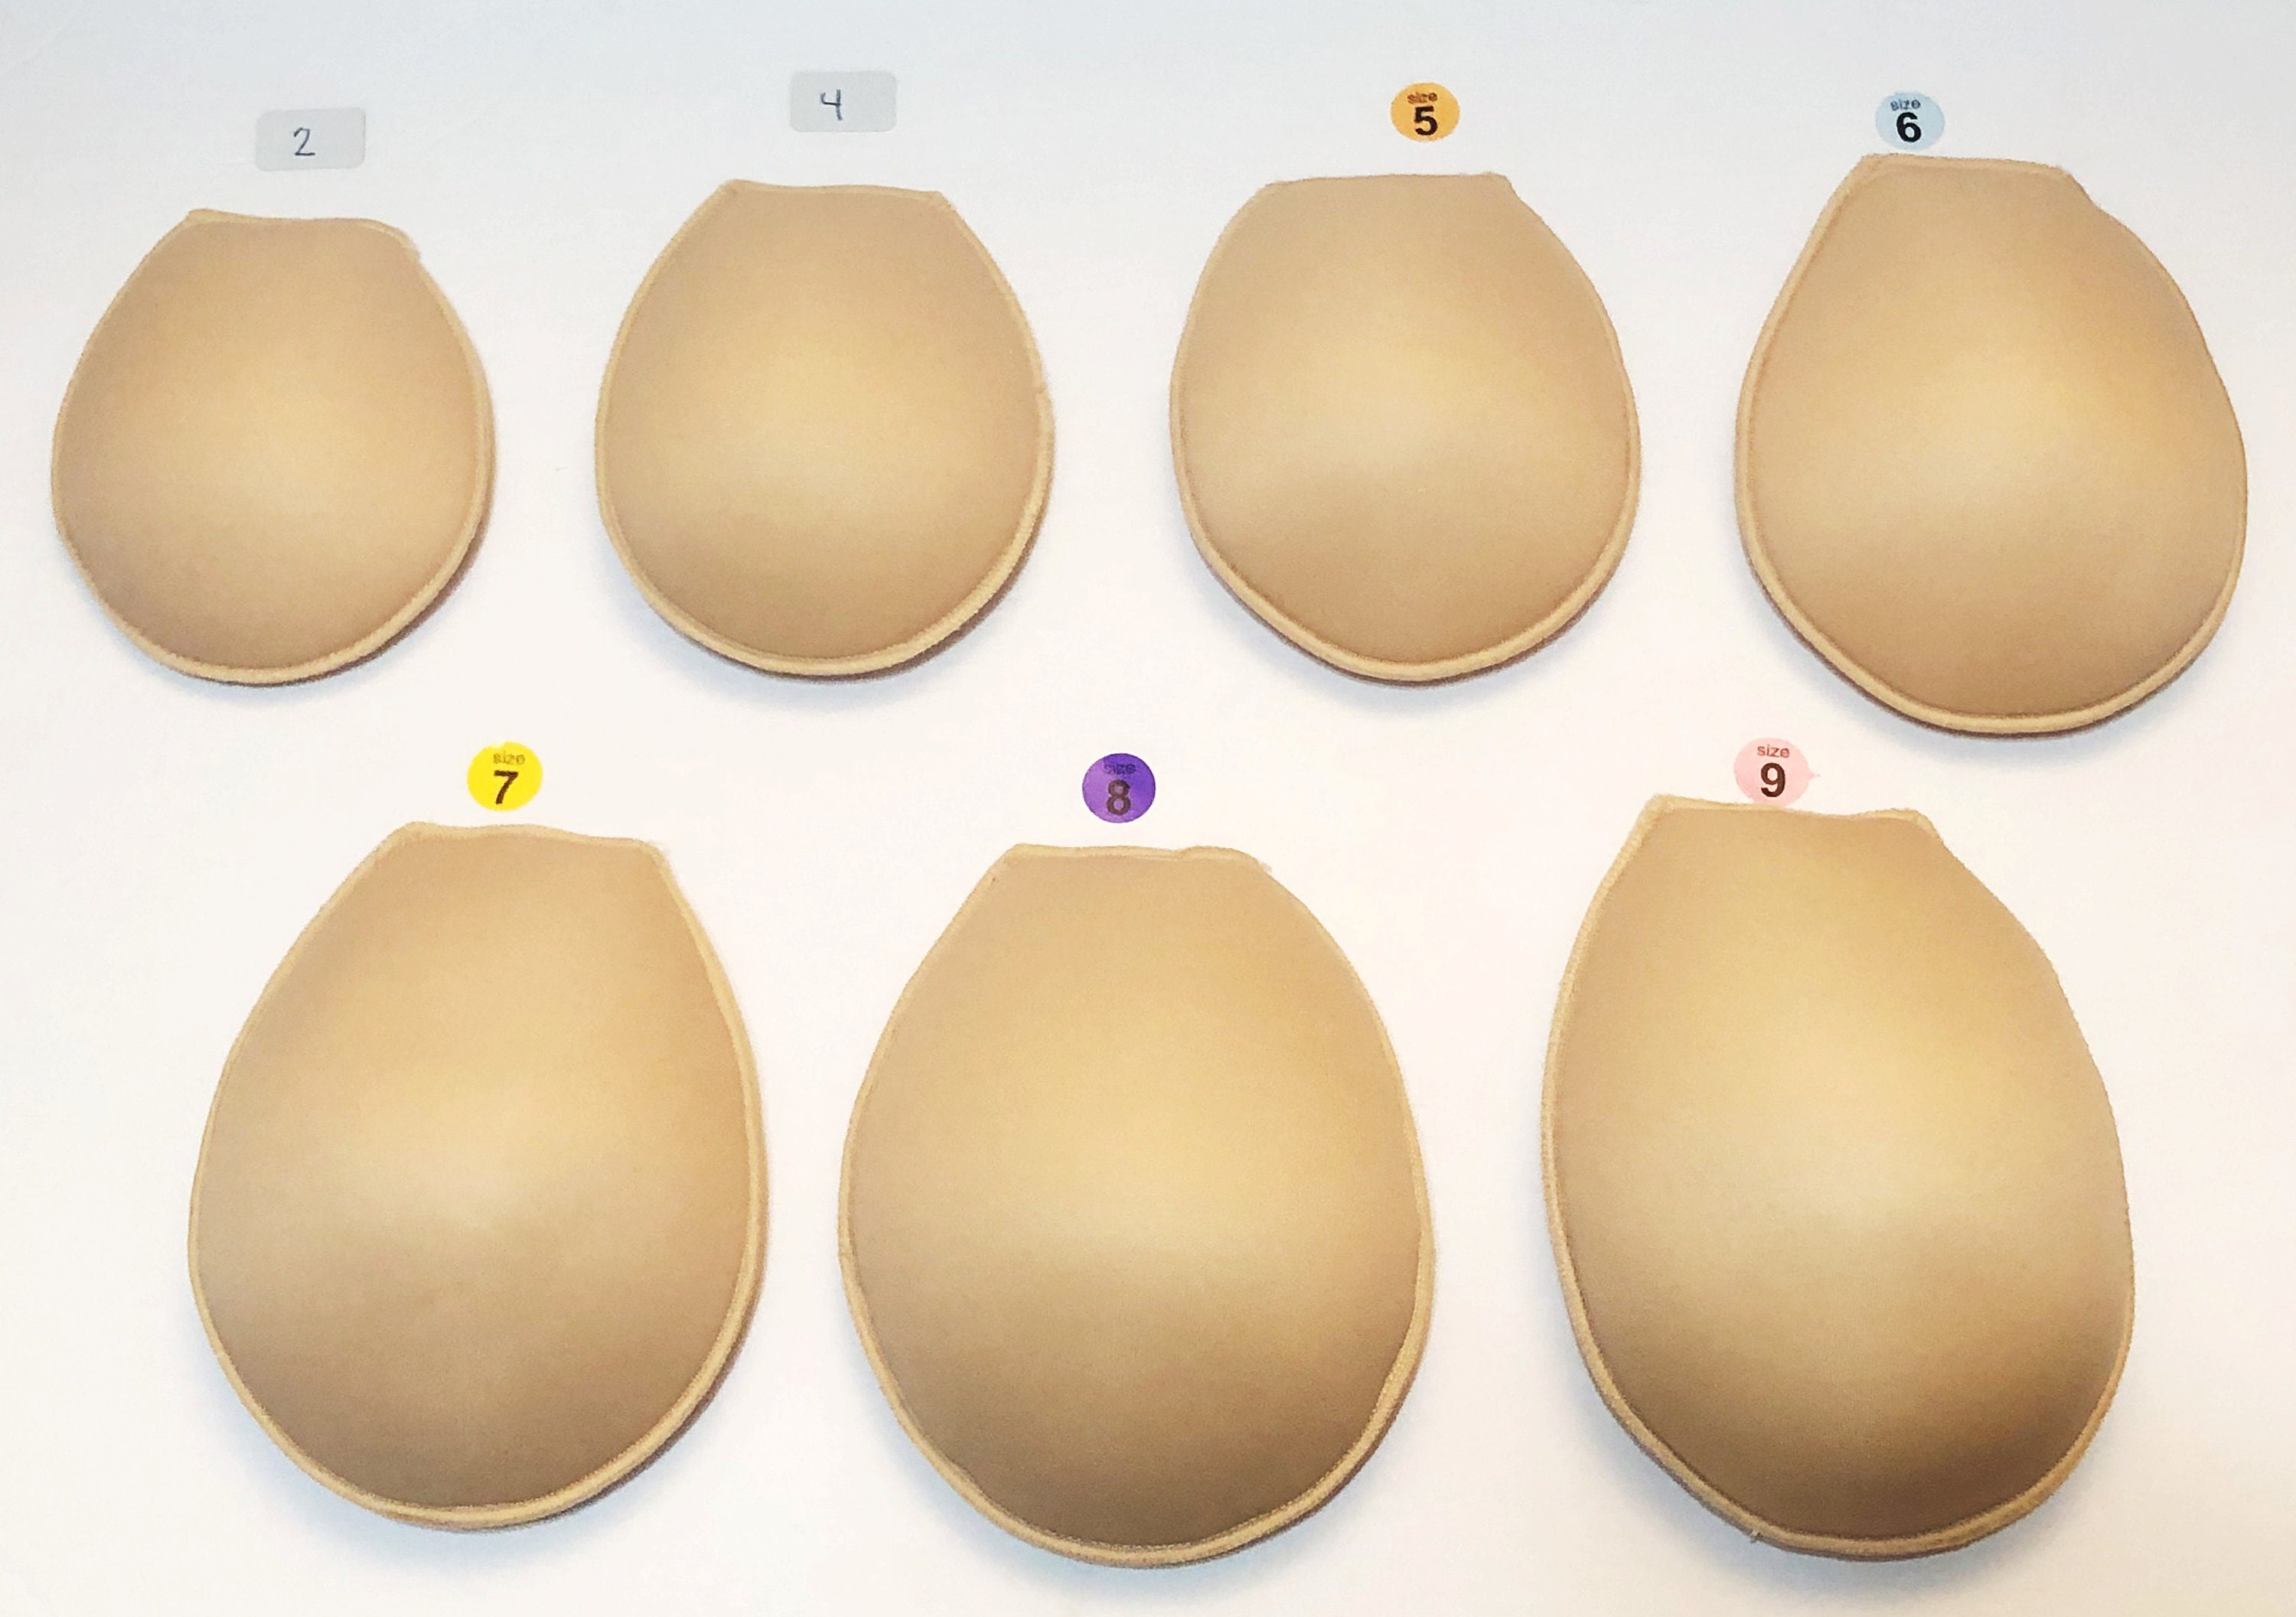 Wearable Silicone Breast Forms Fake Boobs Bra Adjustable Strap for  Crossdresser